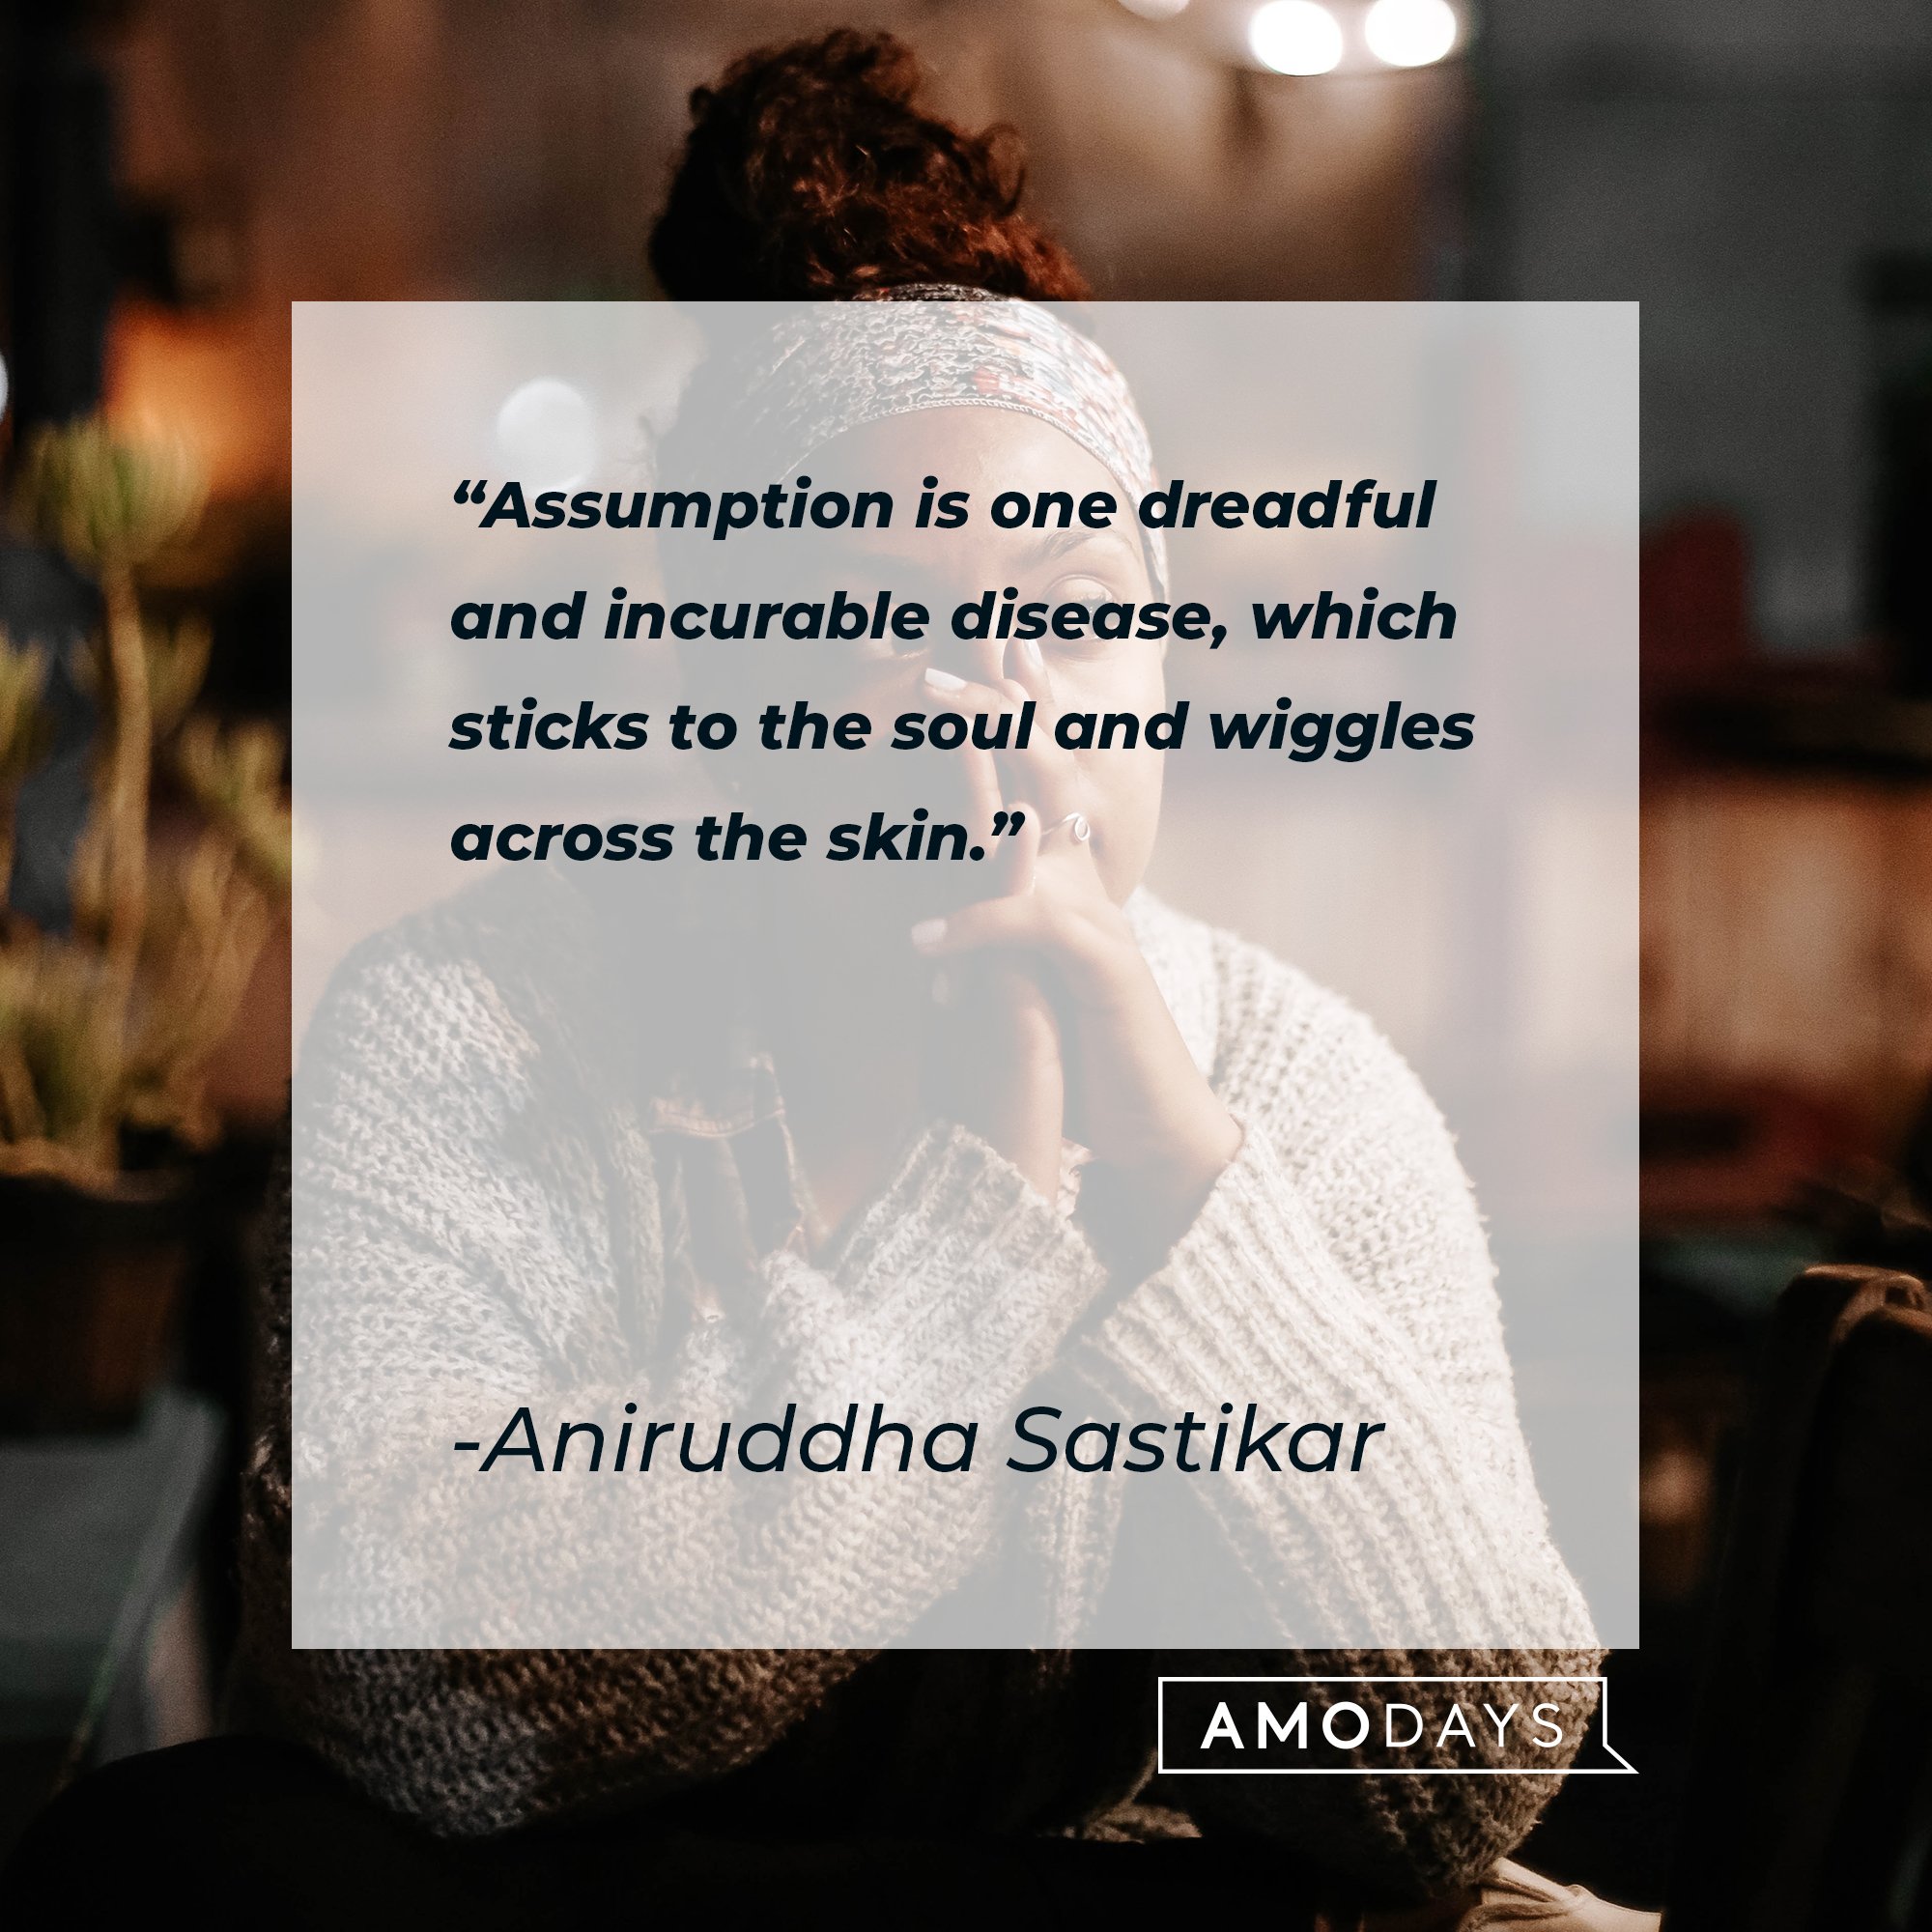 Aniruddha Sastikar’s quote: “Assumption is one dreadful and incurable disease, which sticks to the soul and wiggles across the skin.” | Image: AmoDays 